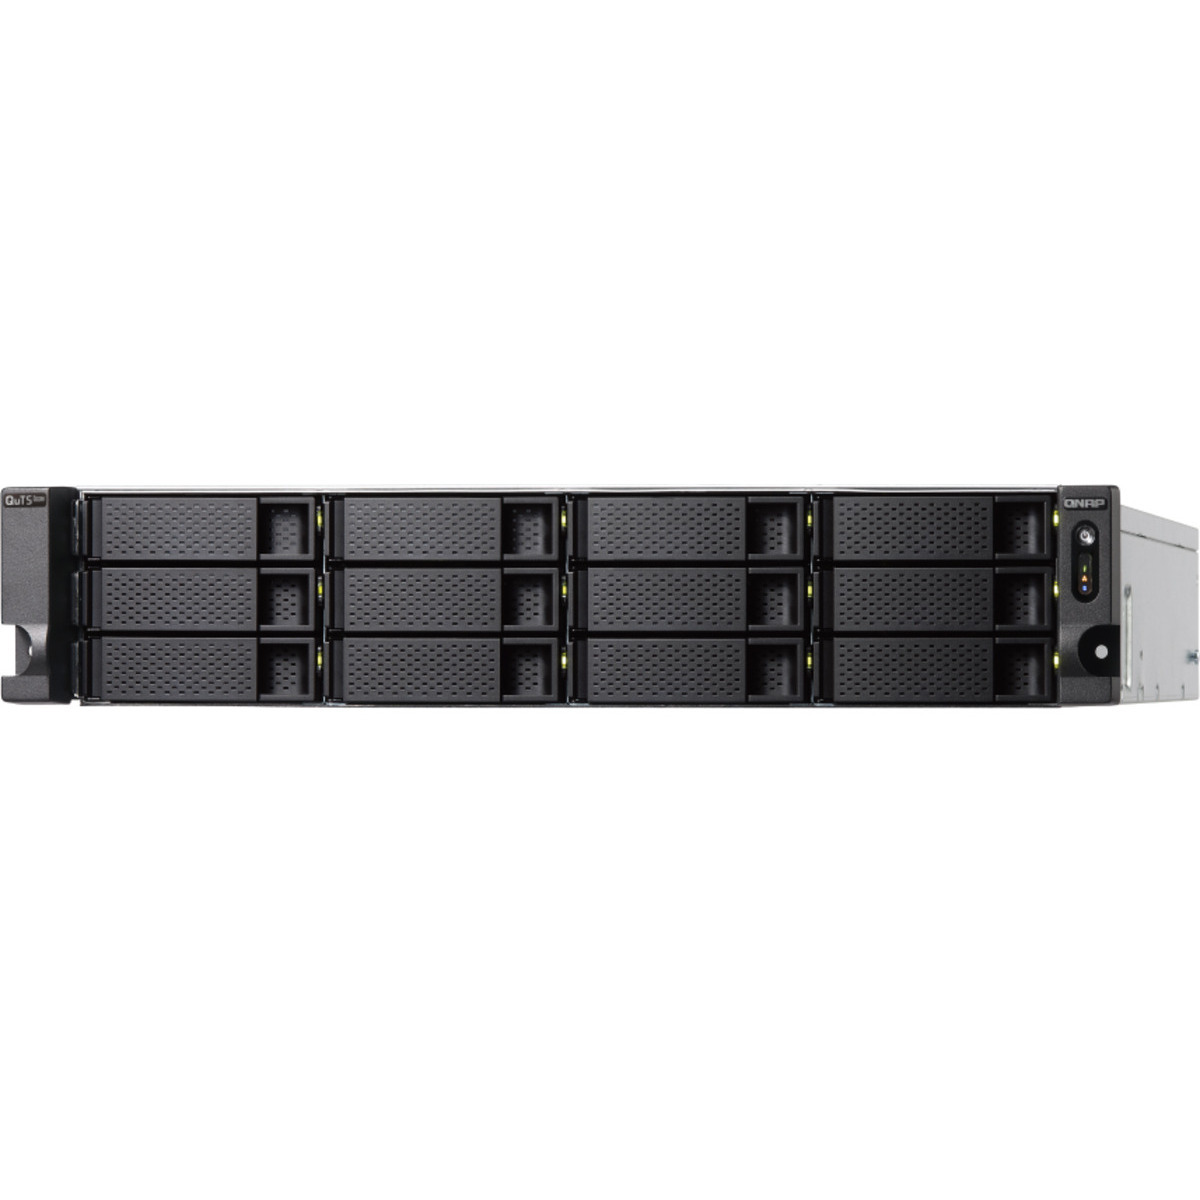 QNAP TS-h1886XU-RP R2 QuTS hero Edition 98tb 12+6-Bay RackMount Large Business / Enterprise NAS - Network Attached Storage Device 7x14tb Seagate IronWolf Pro ST14000NT001 3.5 7200rpm SATA 6Gb/s HDD NAS Class Drives Installed - Burn-In Tested TS-h1886XU-RP R2 QuTS hero Edition